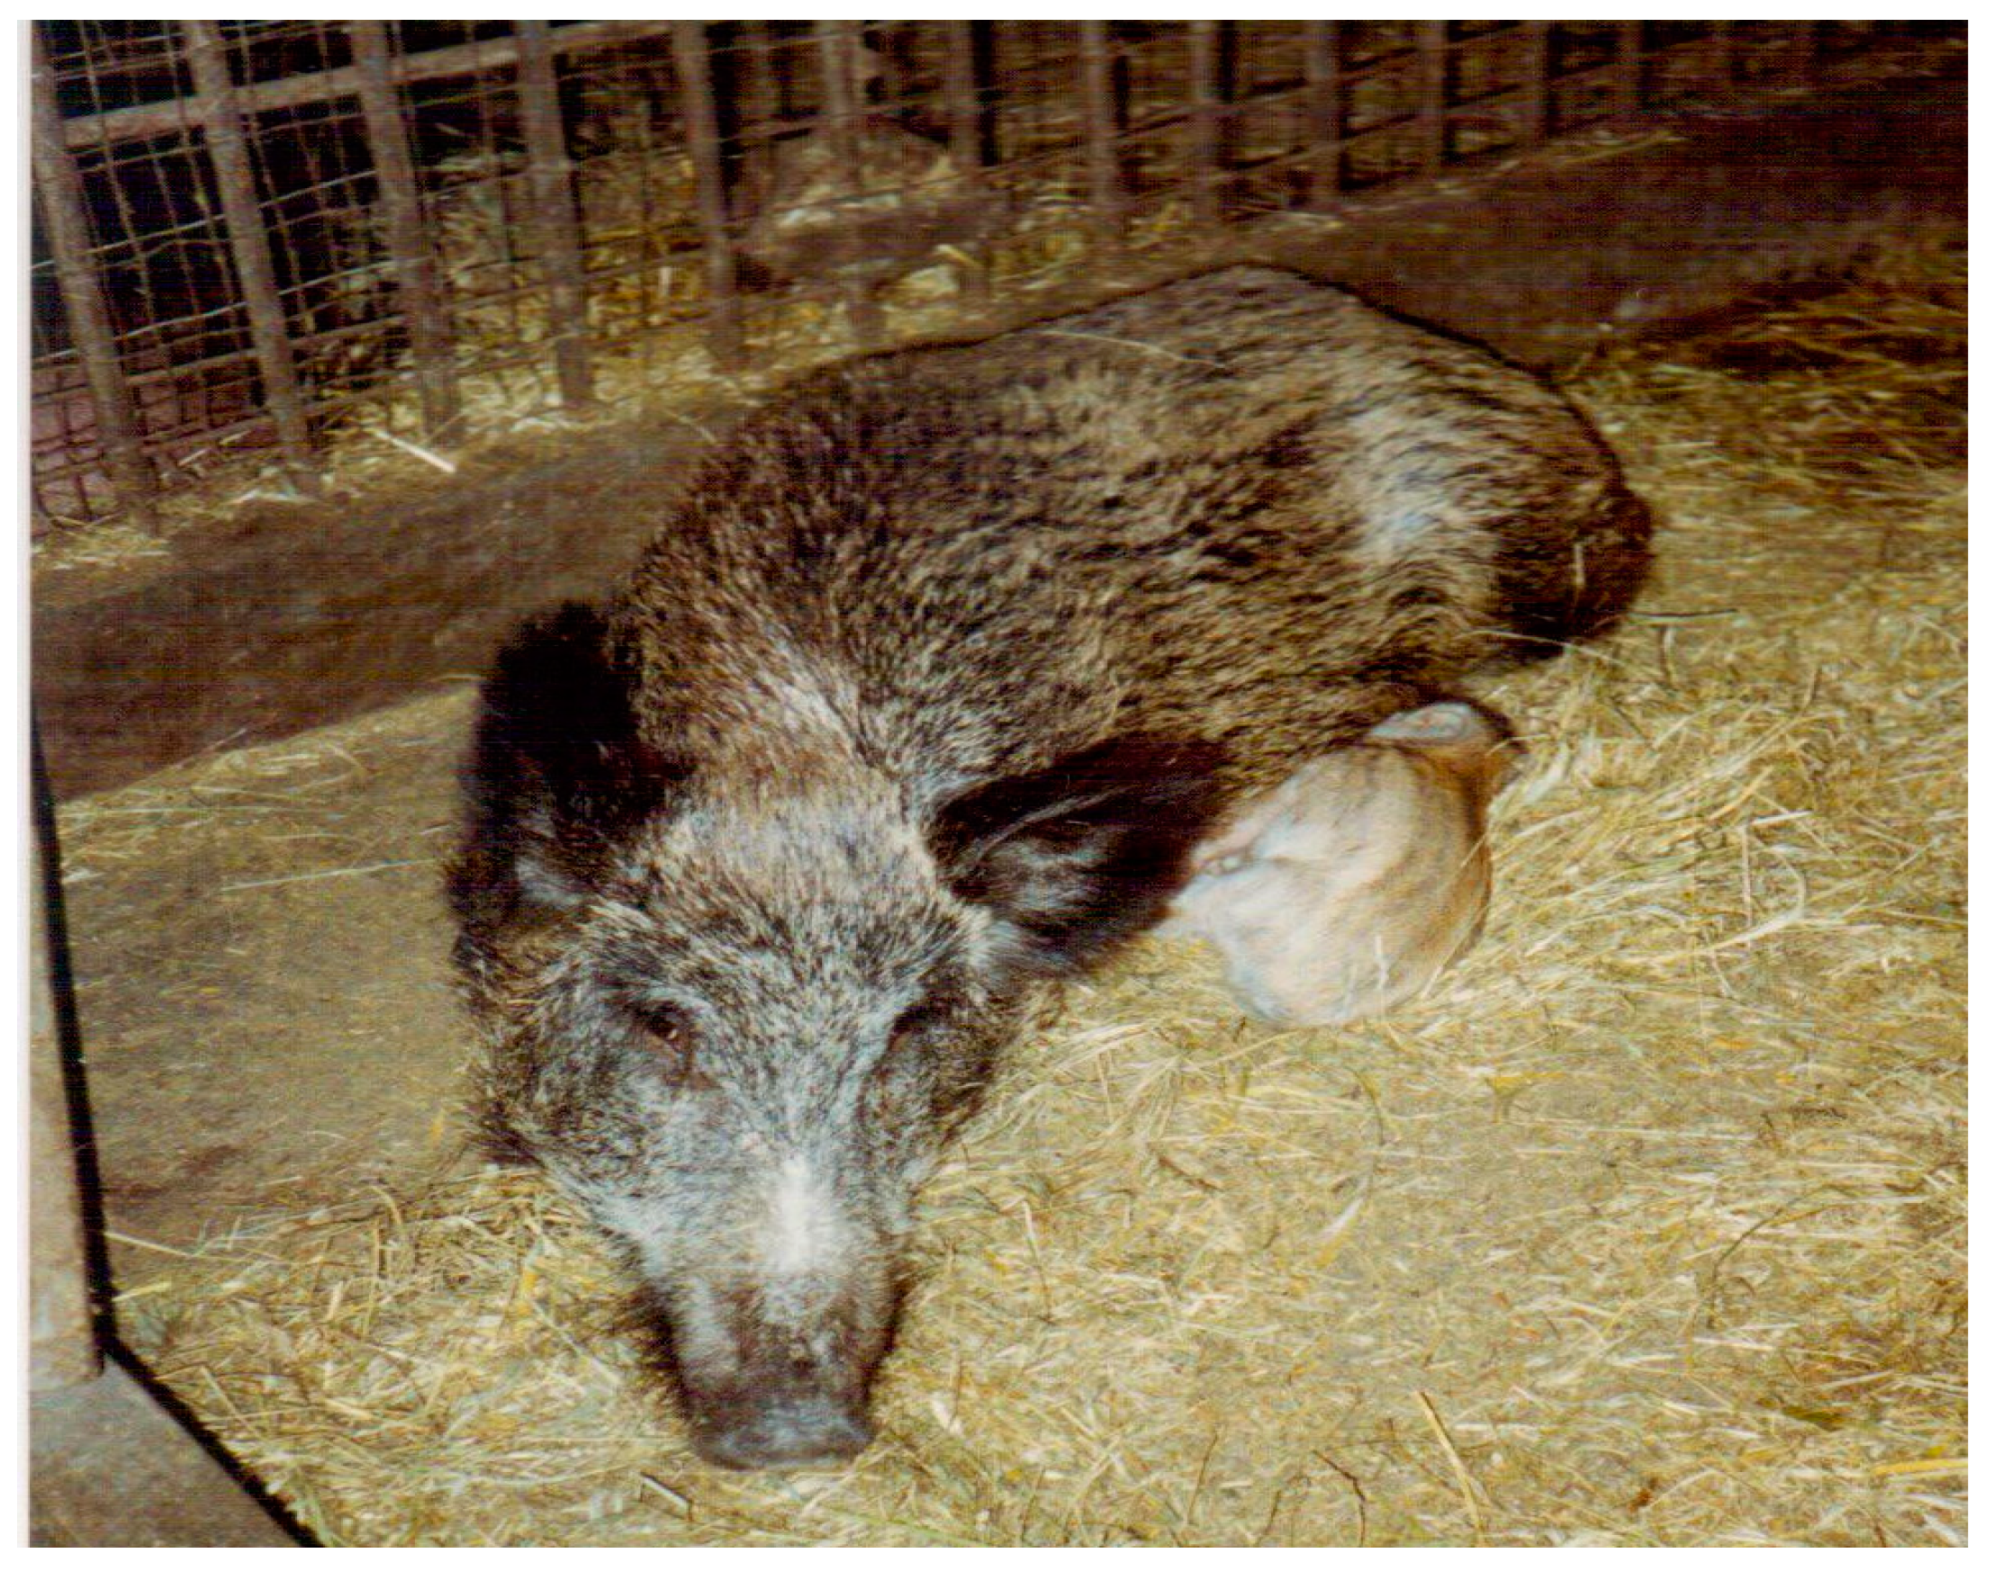 Animals | Free Full-Text | Use of Wild Boar (Sus scrofa) as a